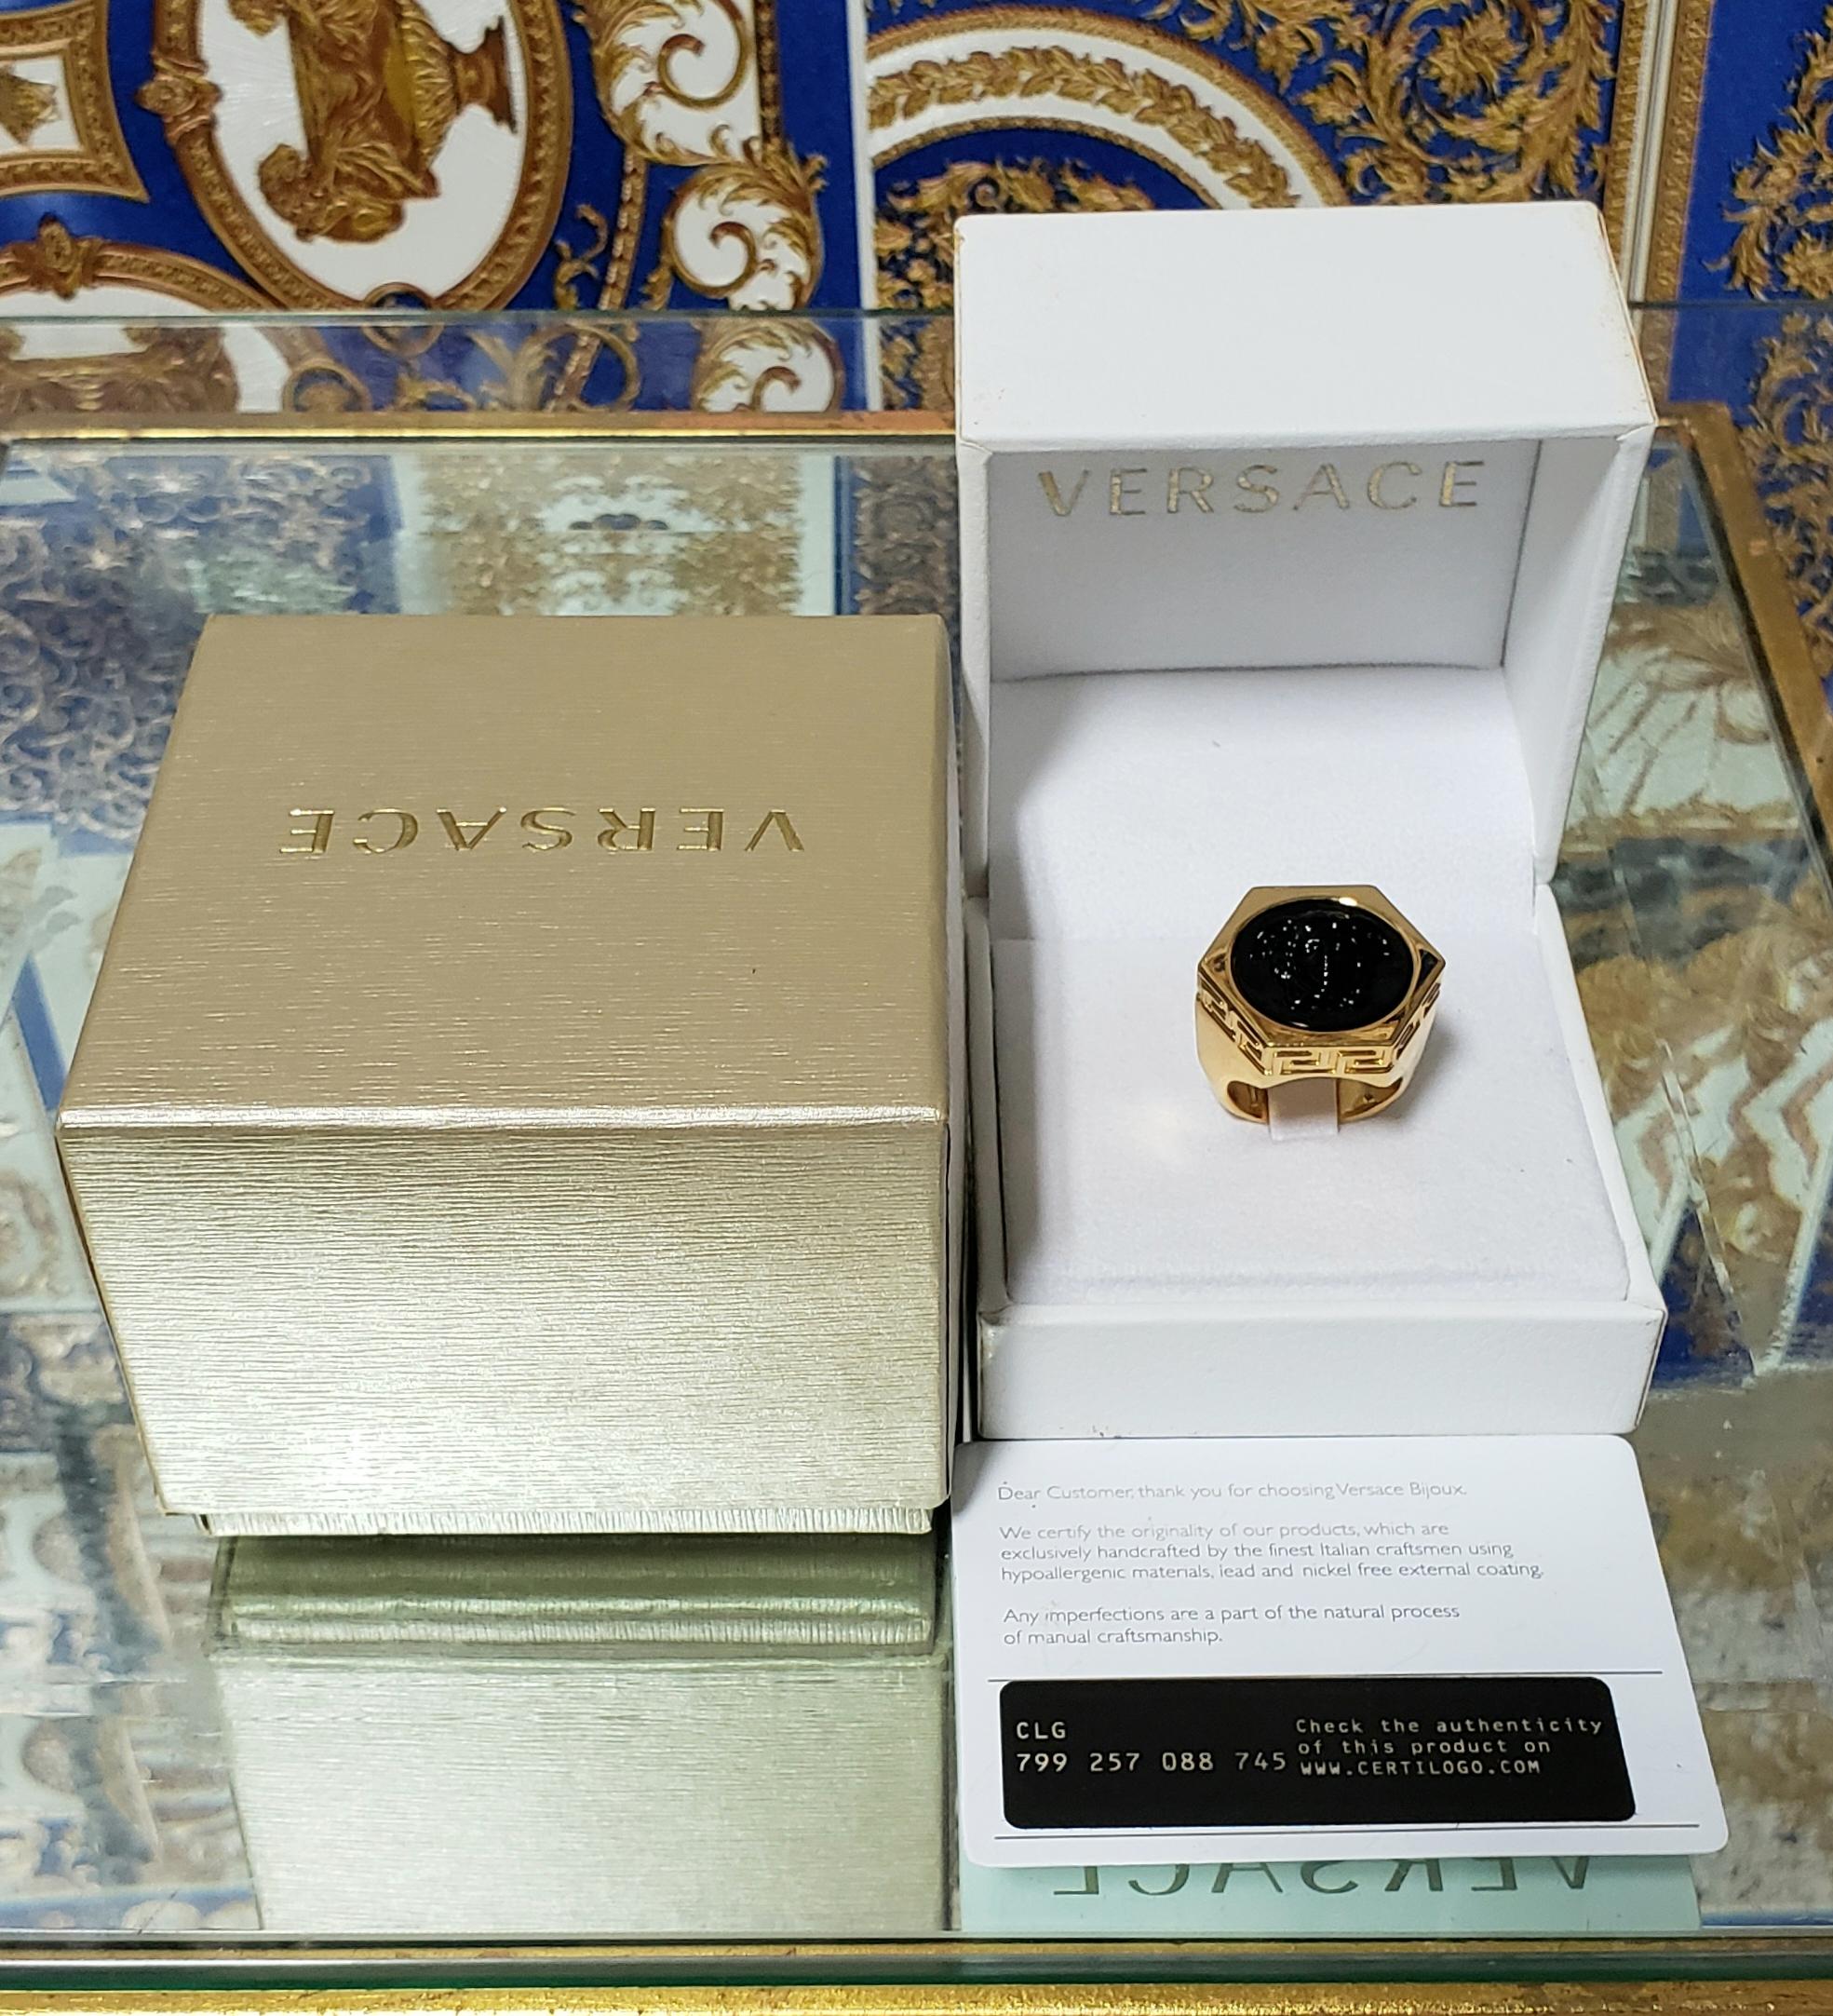 VERSACE


24K Gold Plated Ring

Black Medusa 

Greek key



Made in Italy



Brand new. Display model, got minor scratches.

100% authentic guarantee. Comes with Versace box.

       PLEASE VISIT OUR STORE FOR MORE GREAT ITEMS